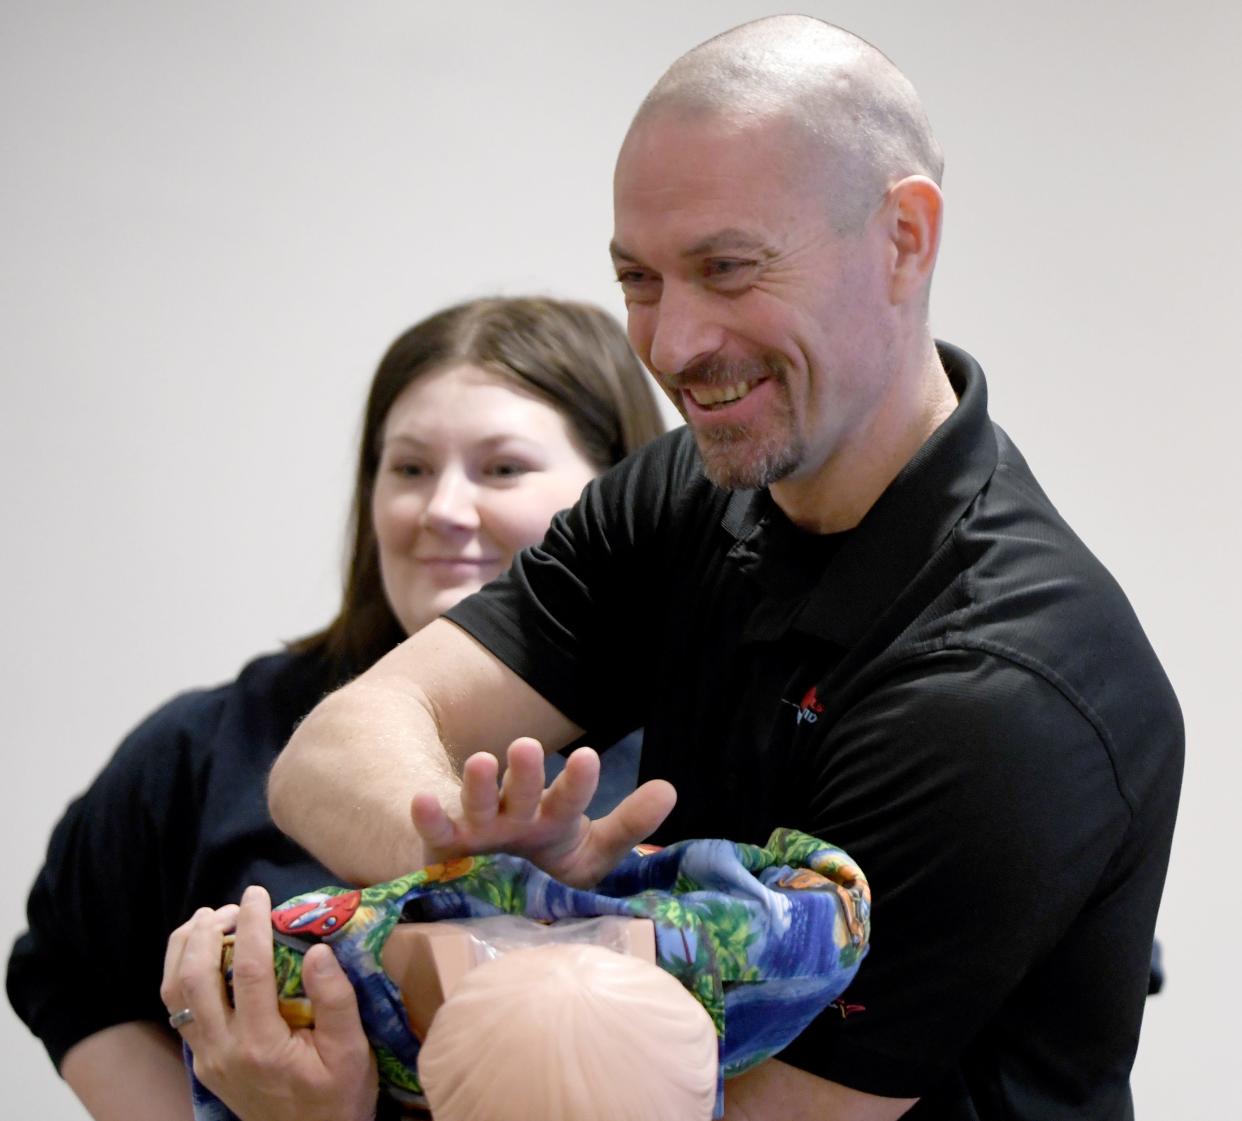 Randy Feesler, owner of The Pulse Provider, instructs a class at the American Red Cross office in Canton. He teaches how to save lives through CPR and other techniques.